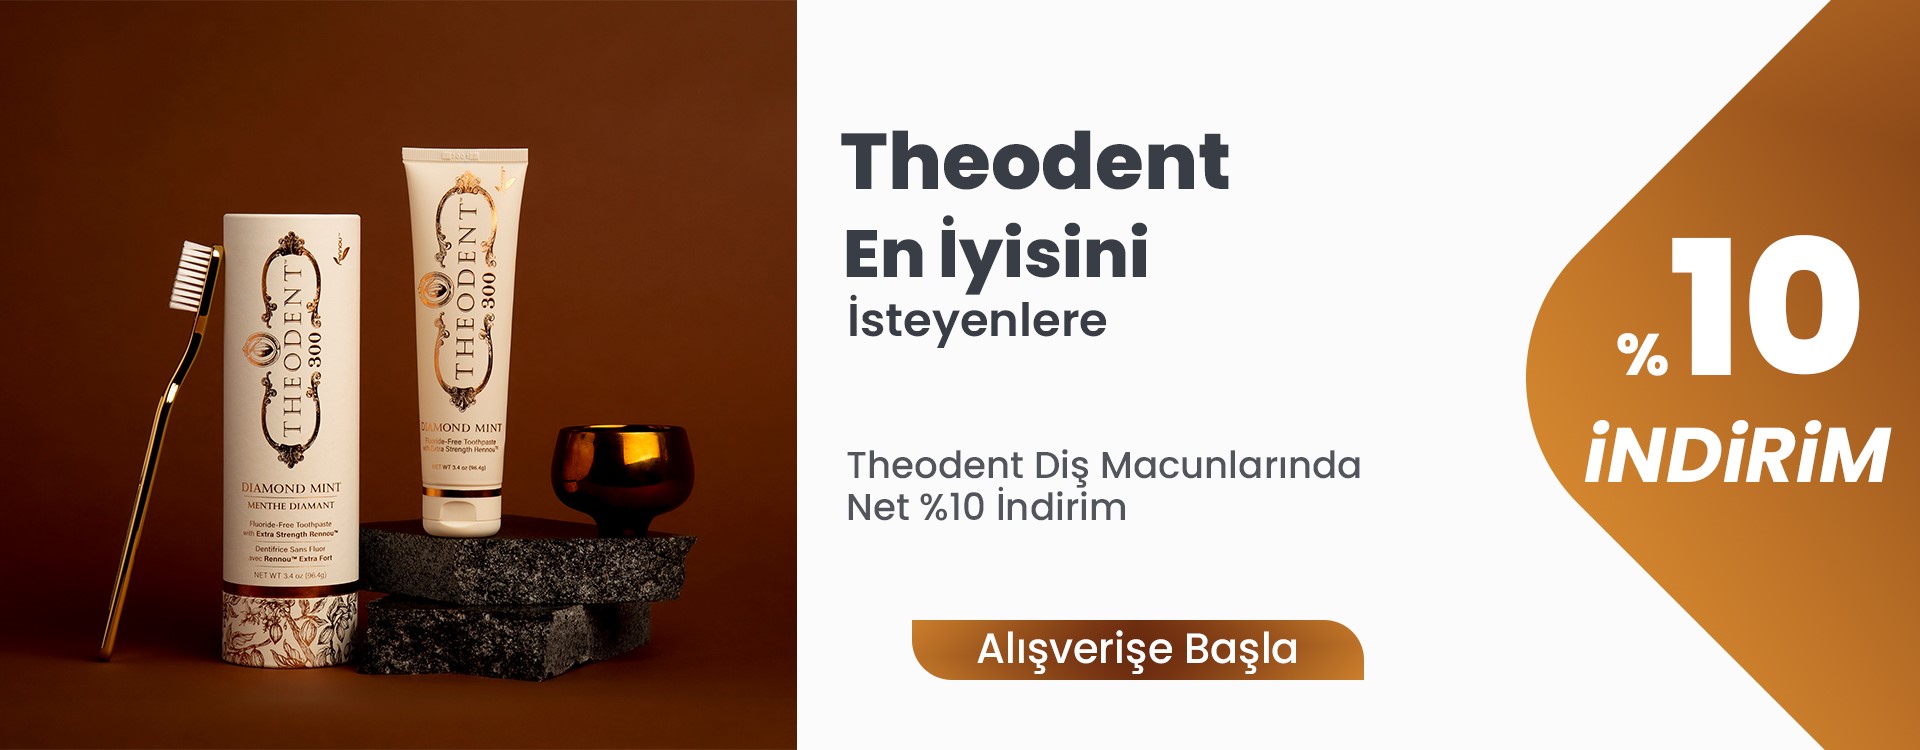 theodent10